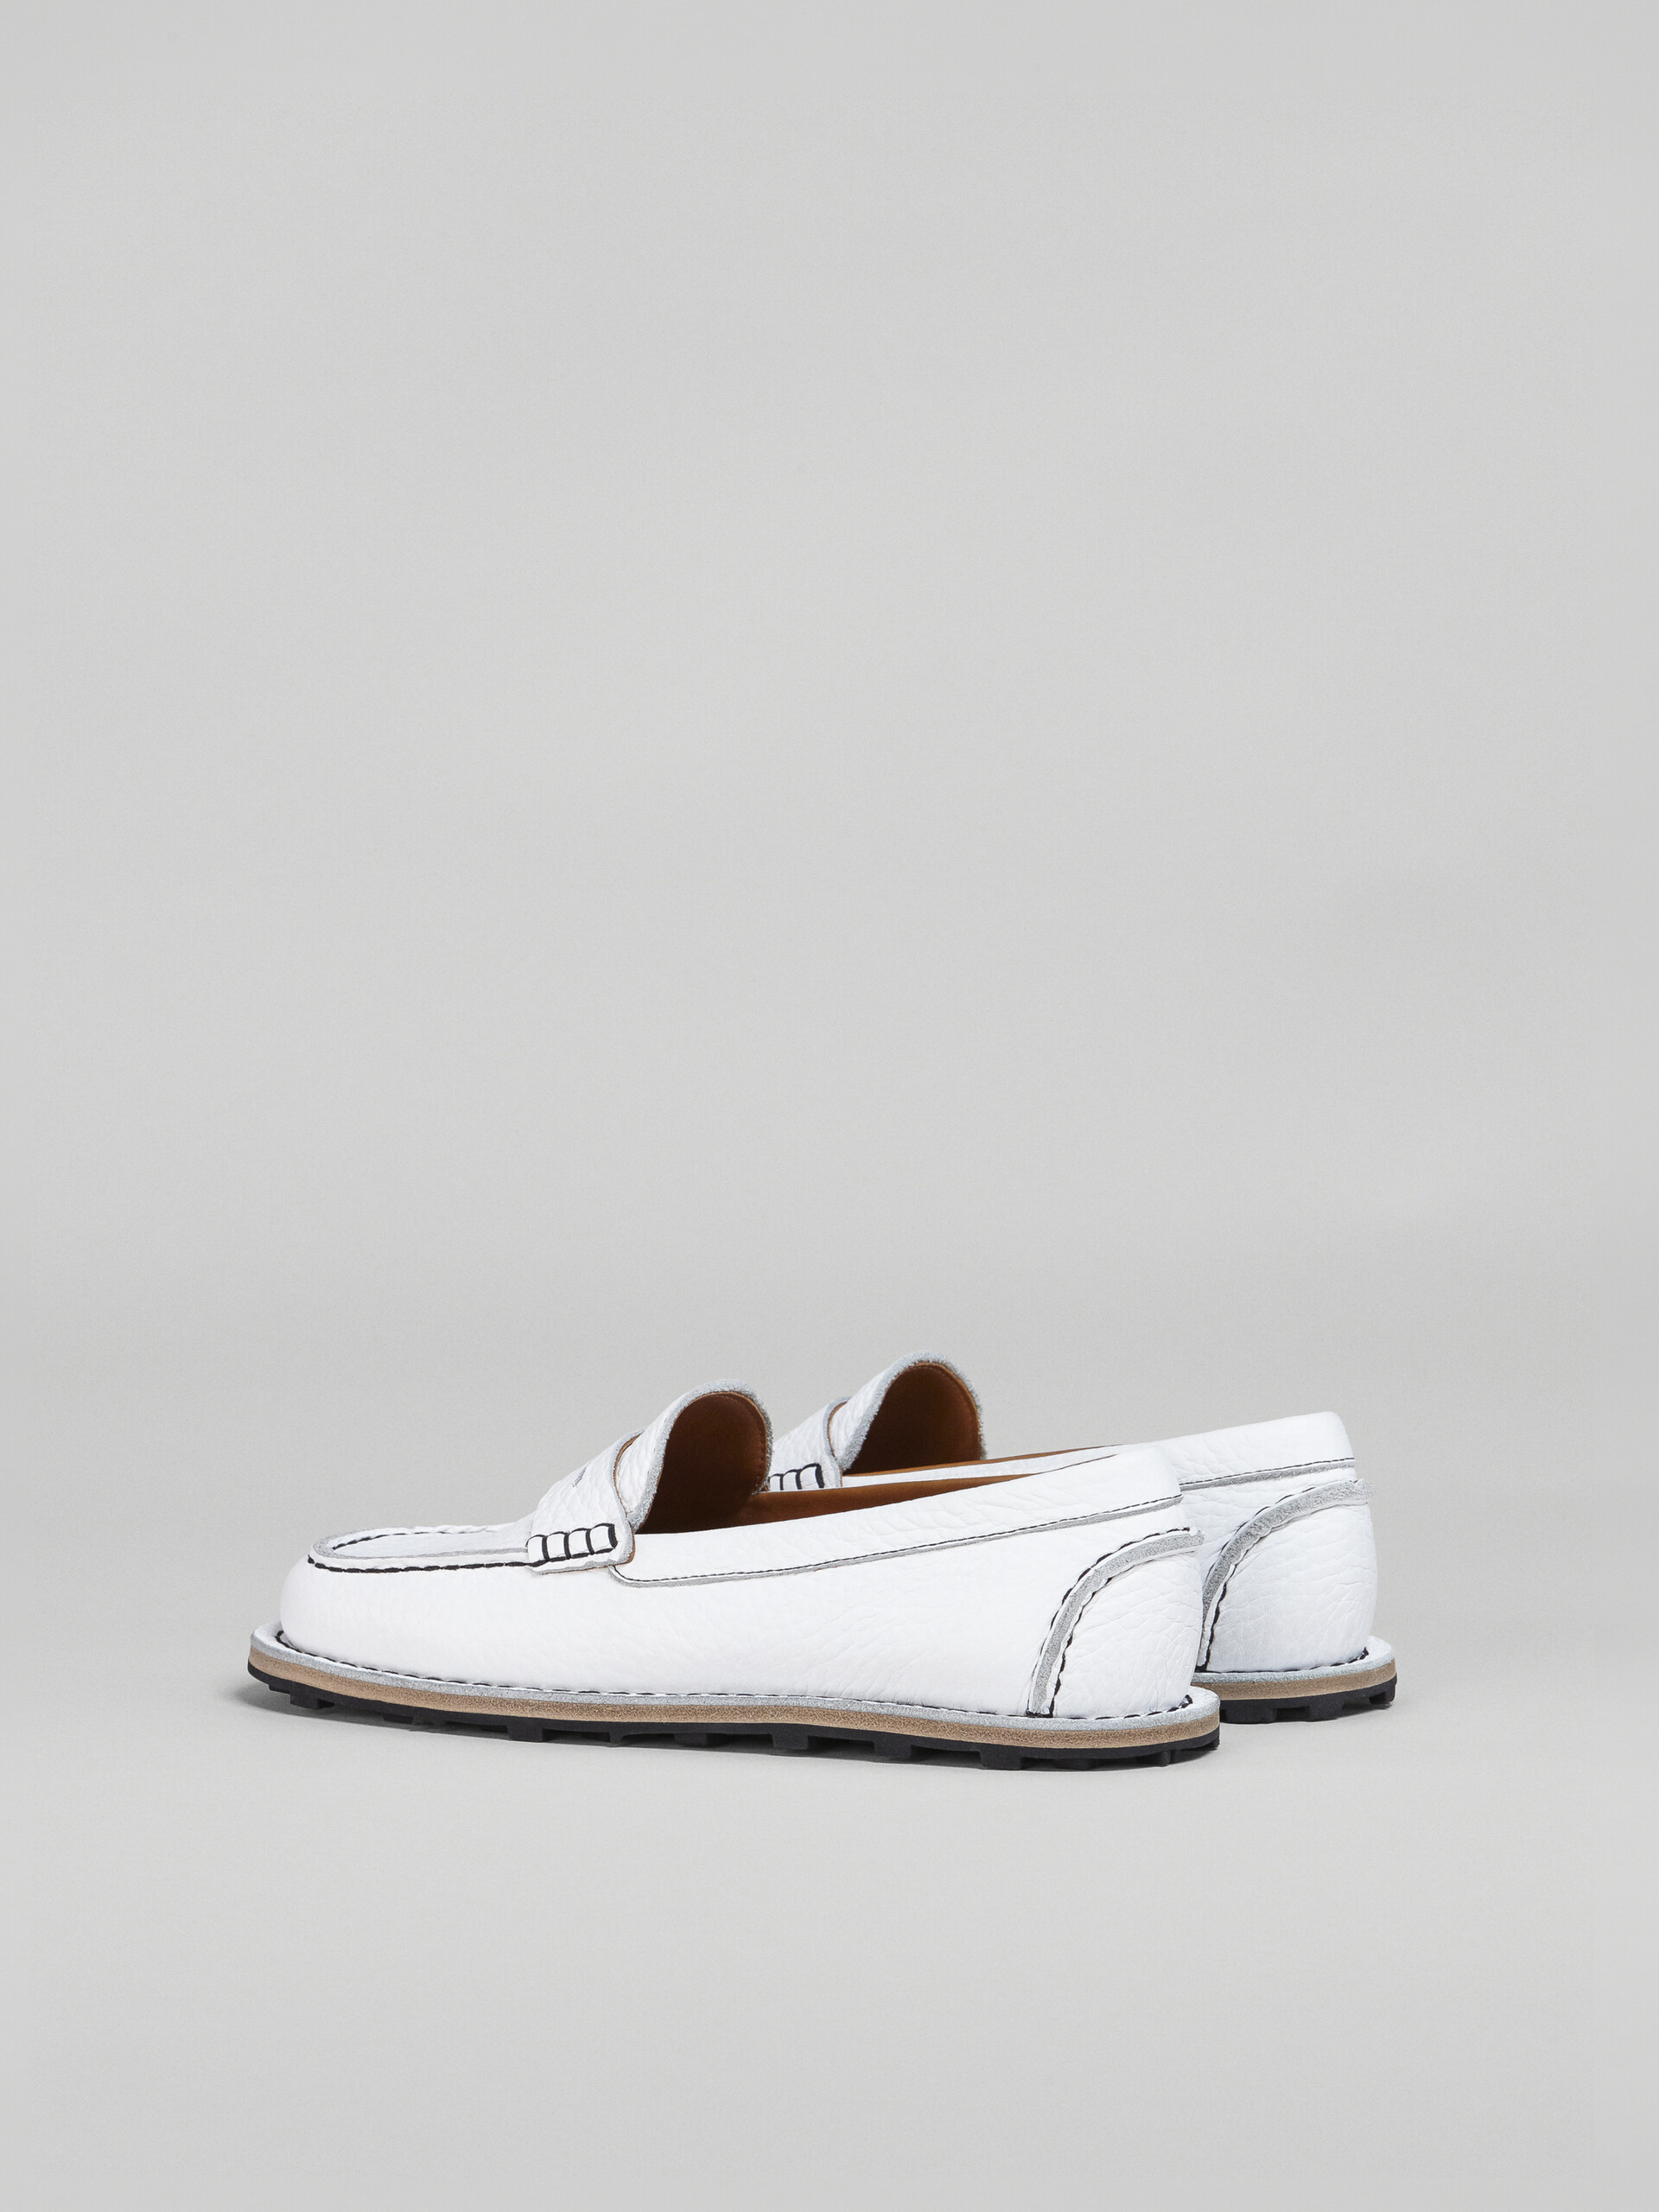 Grained calf leather moccasin - Mocassin - Image 3